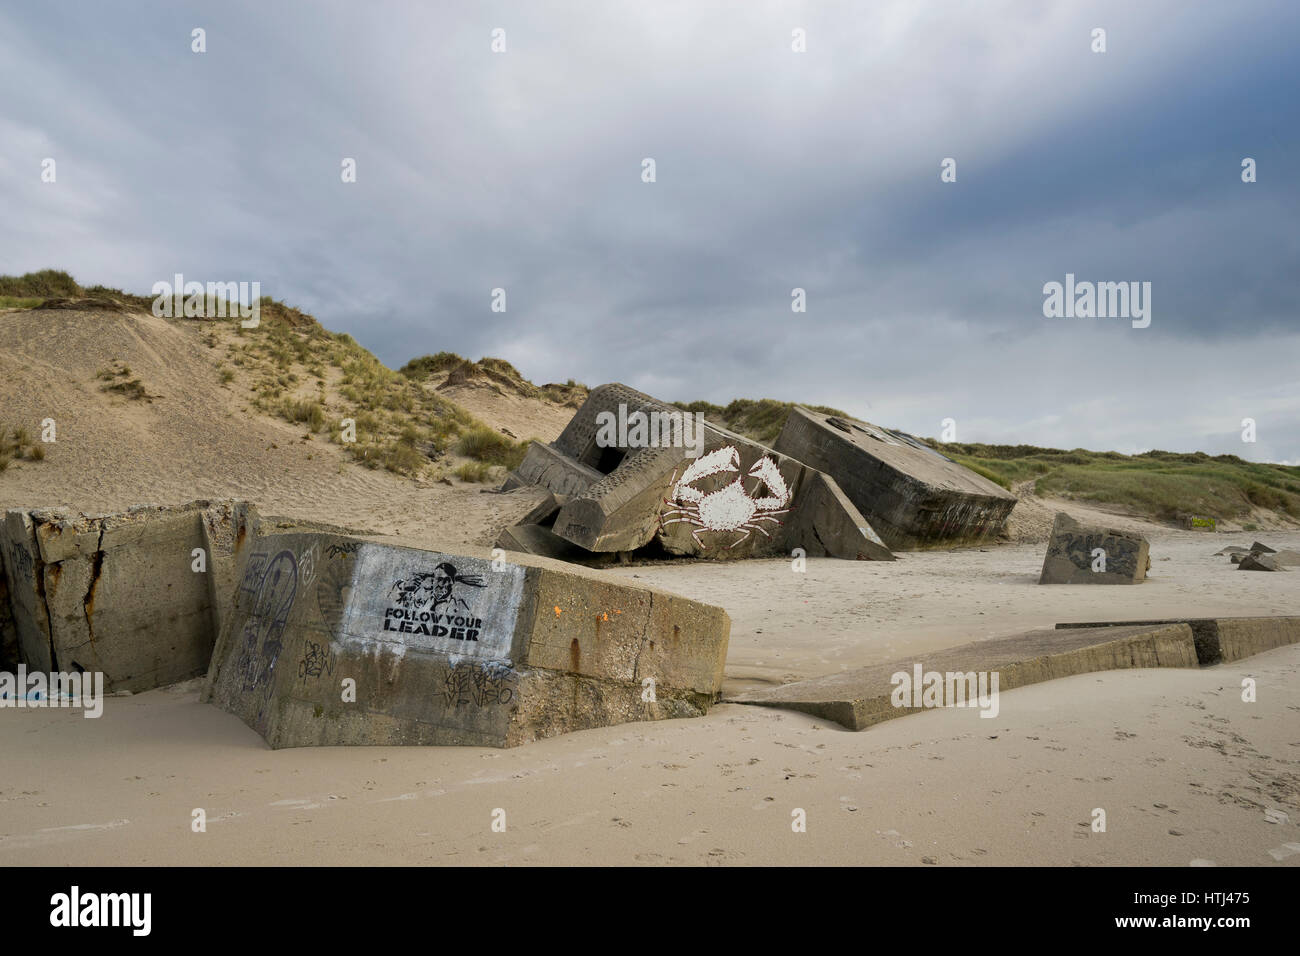 Graffity decorated WW II Bunker at Hardelot Plage, Cote d'Opale Stock Photo